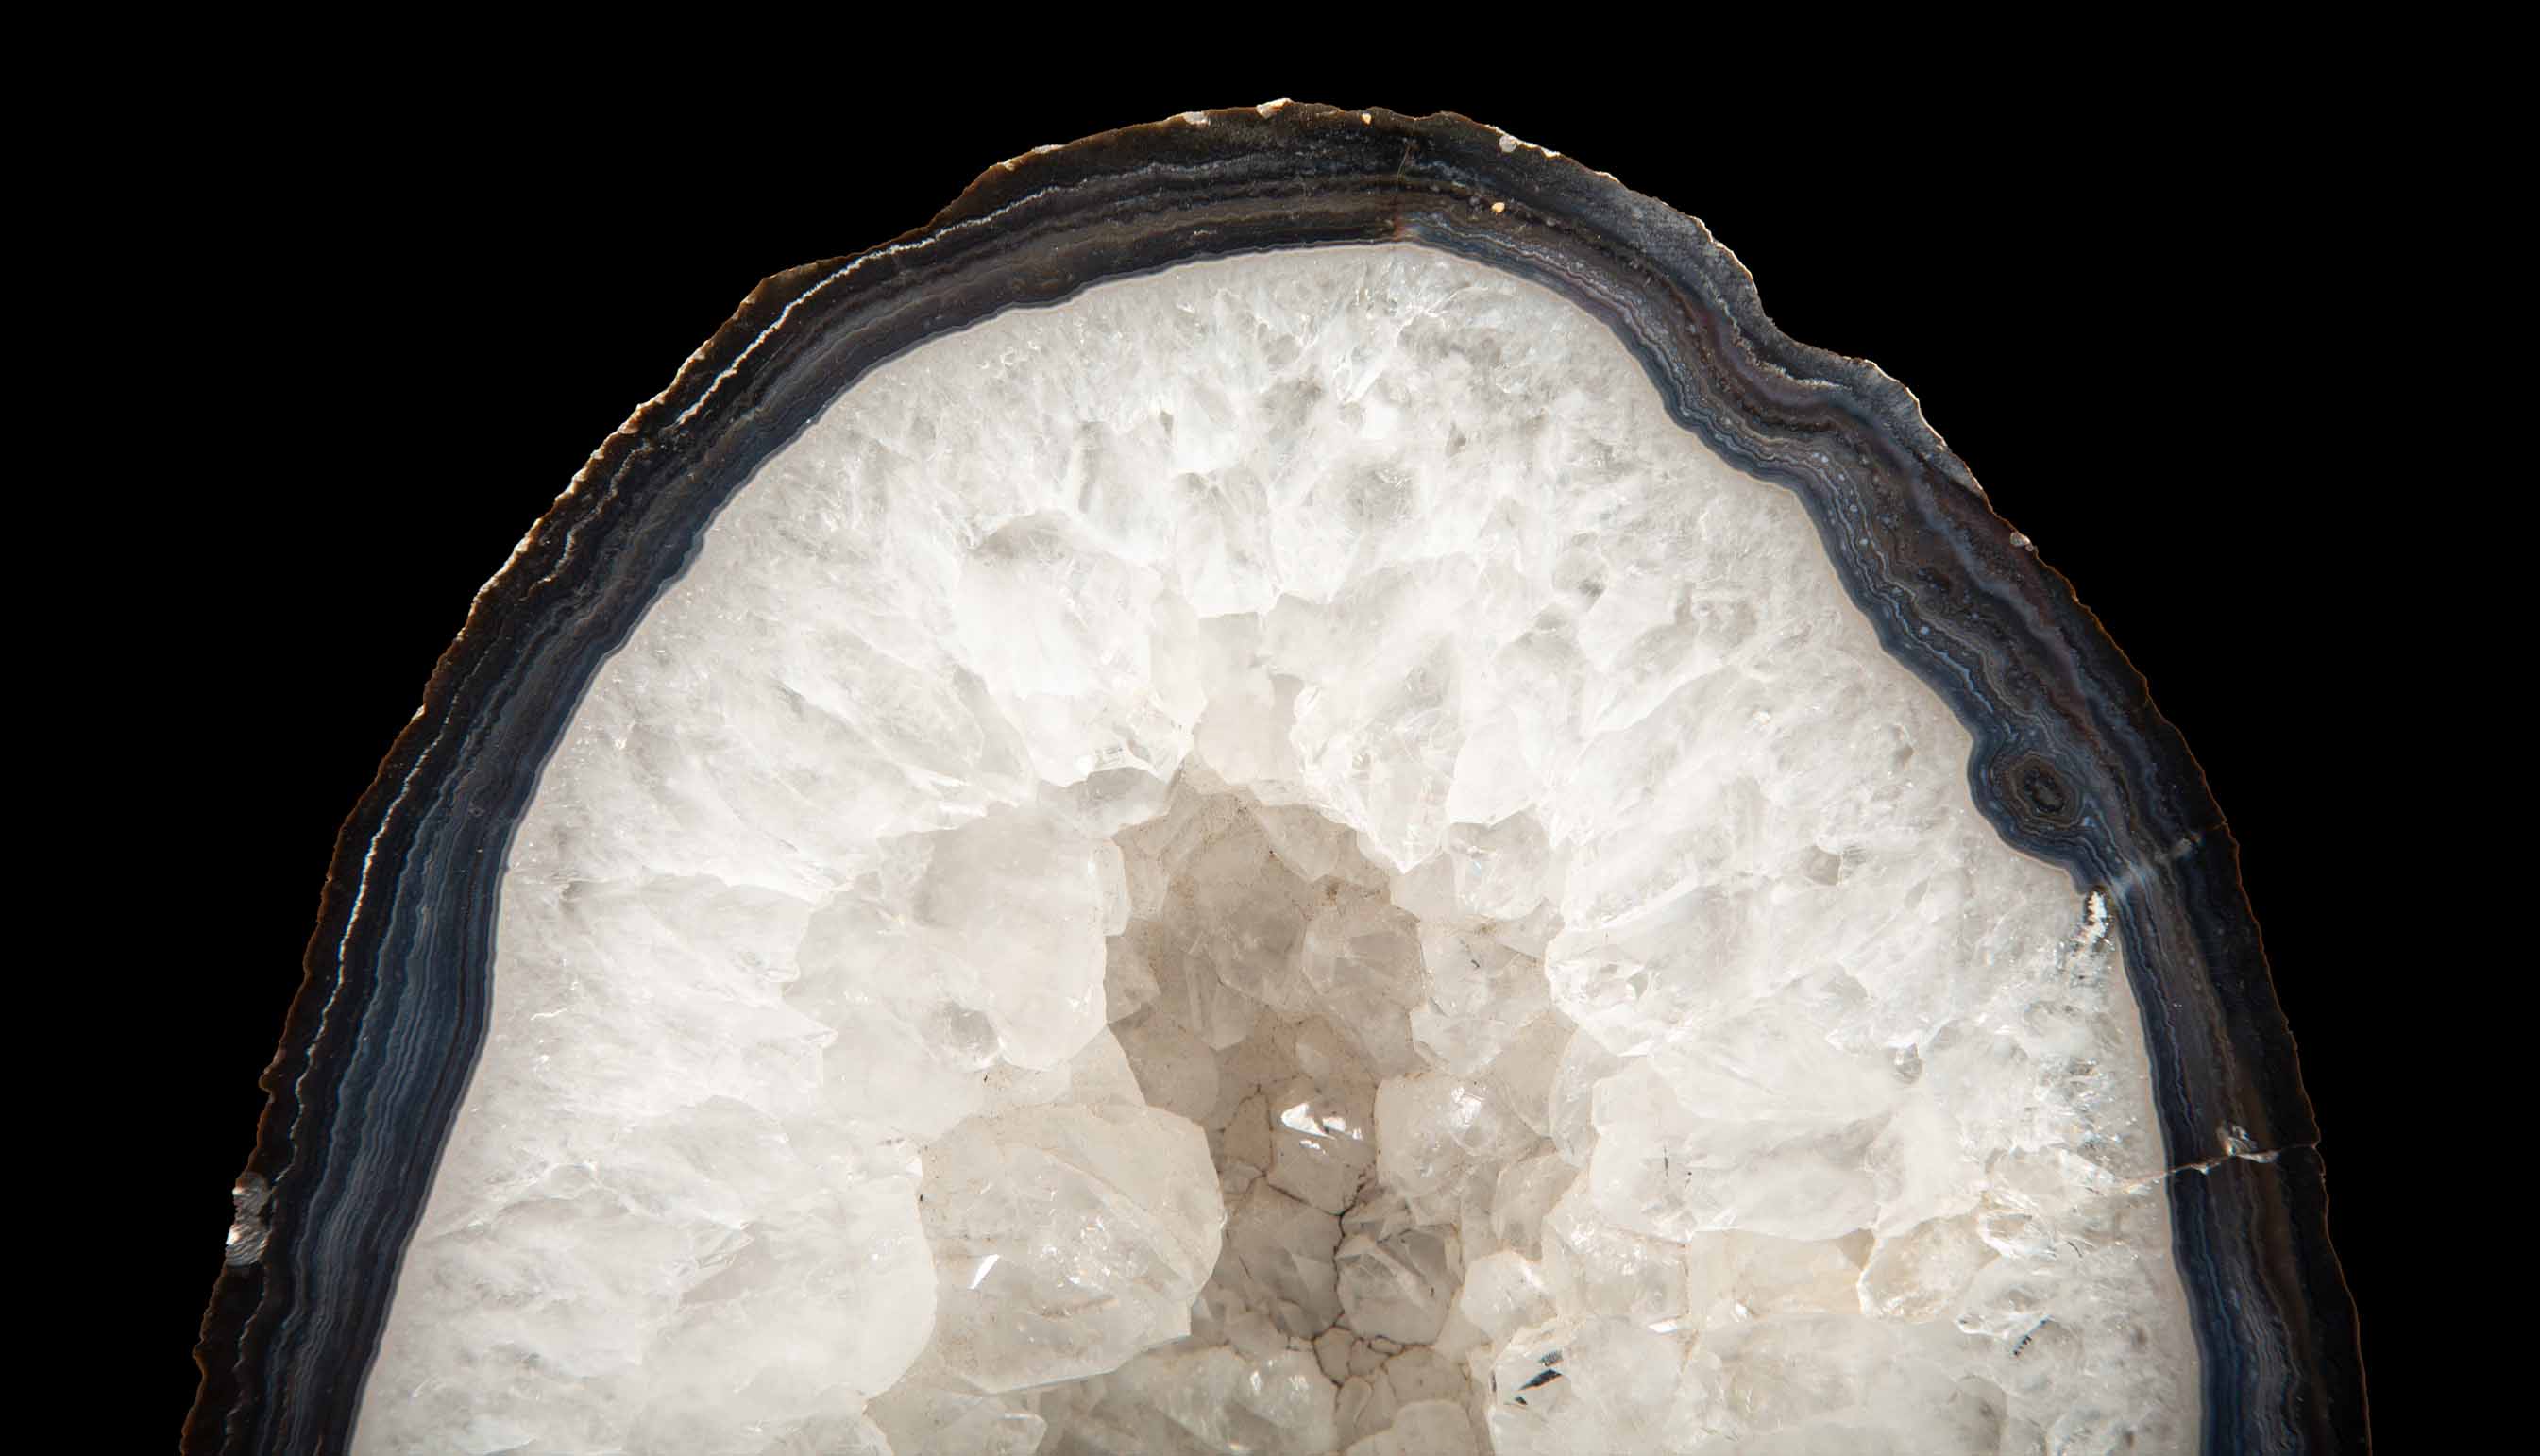 Mounted Geode